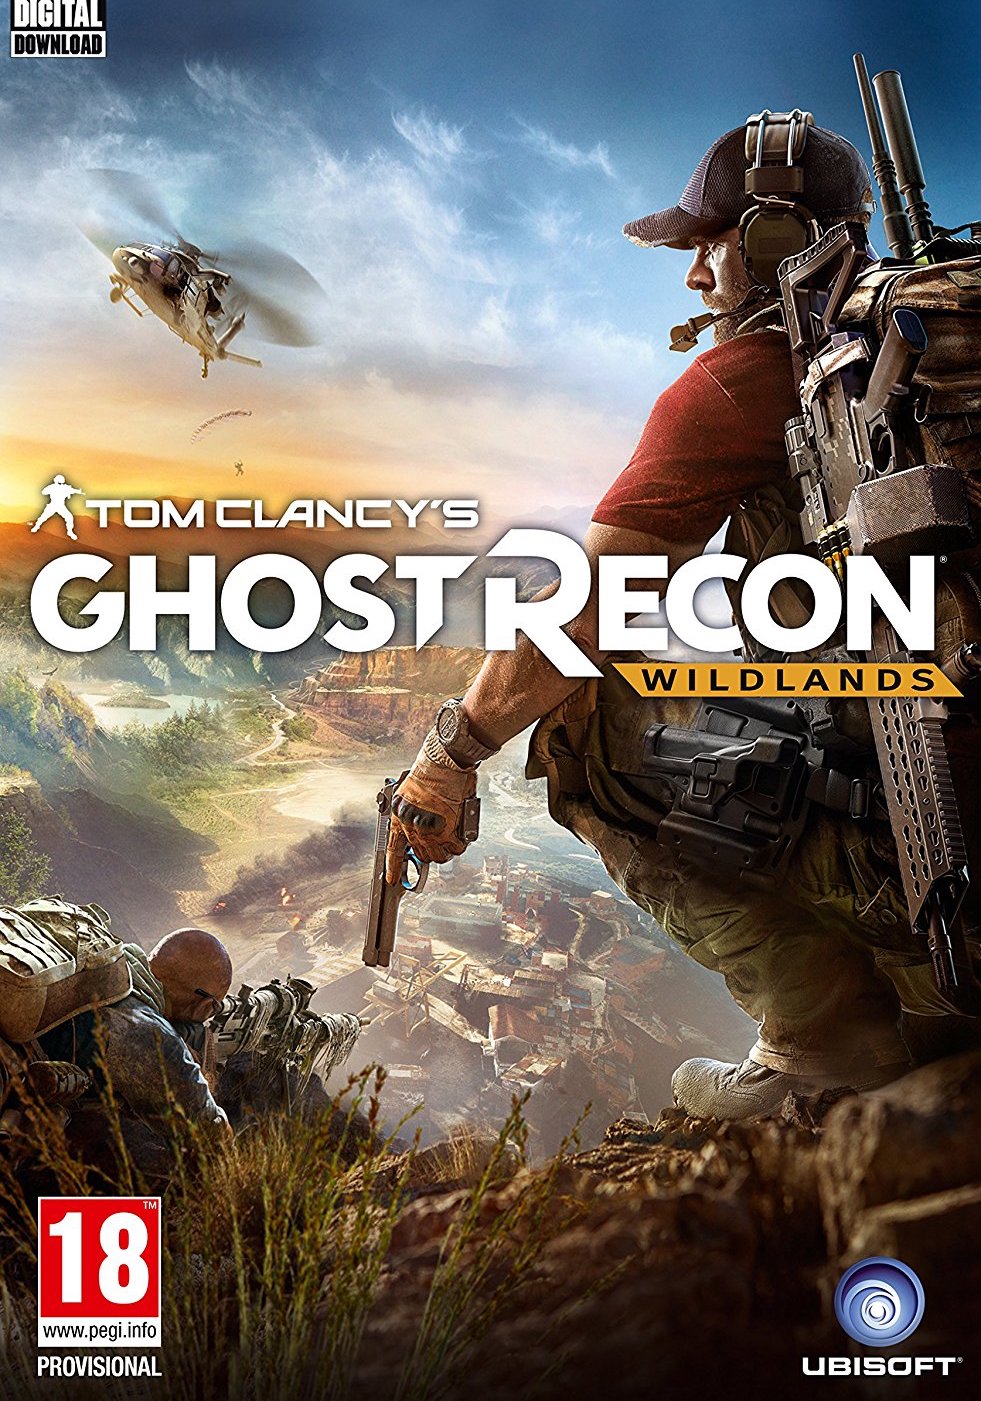 Tom Clancy's Ghost Recon Wildlands: Season Pass CD Key For Uplay: Europe  Middle East  and Africa (cheapest)